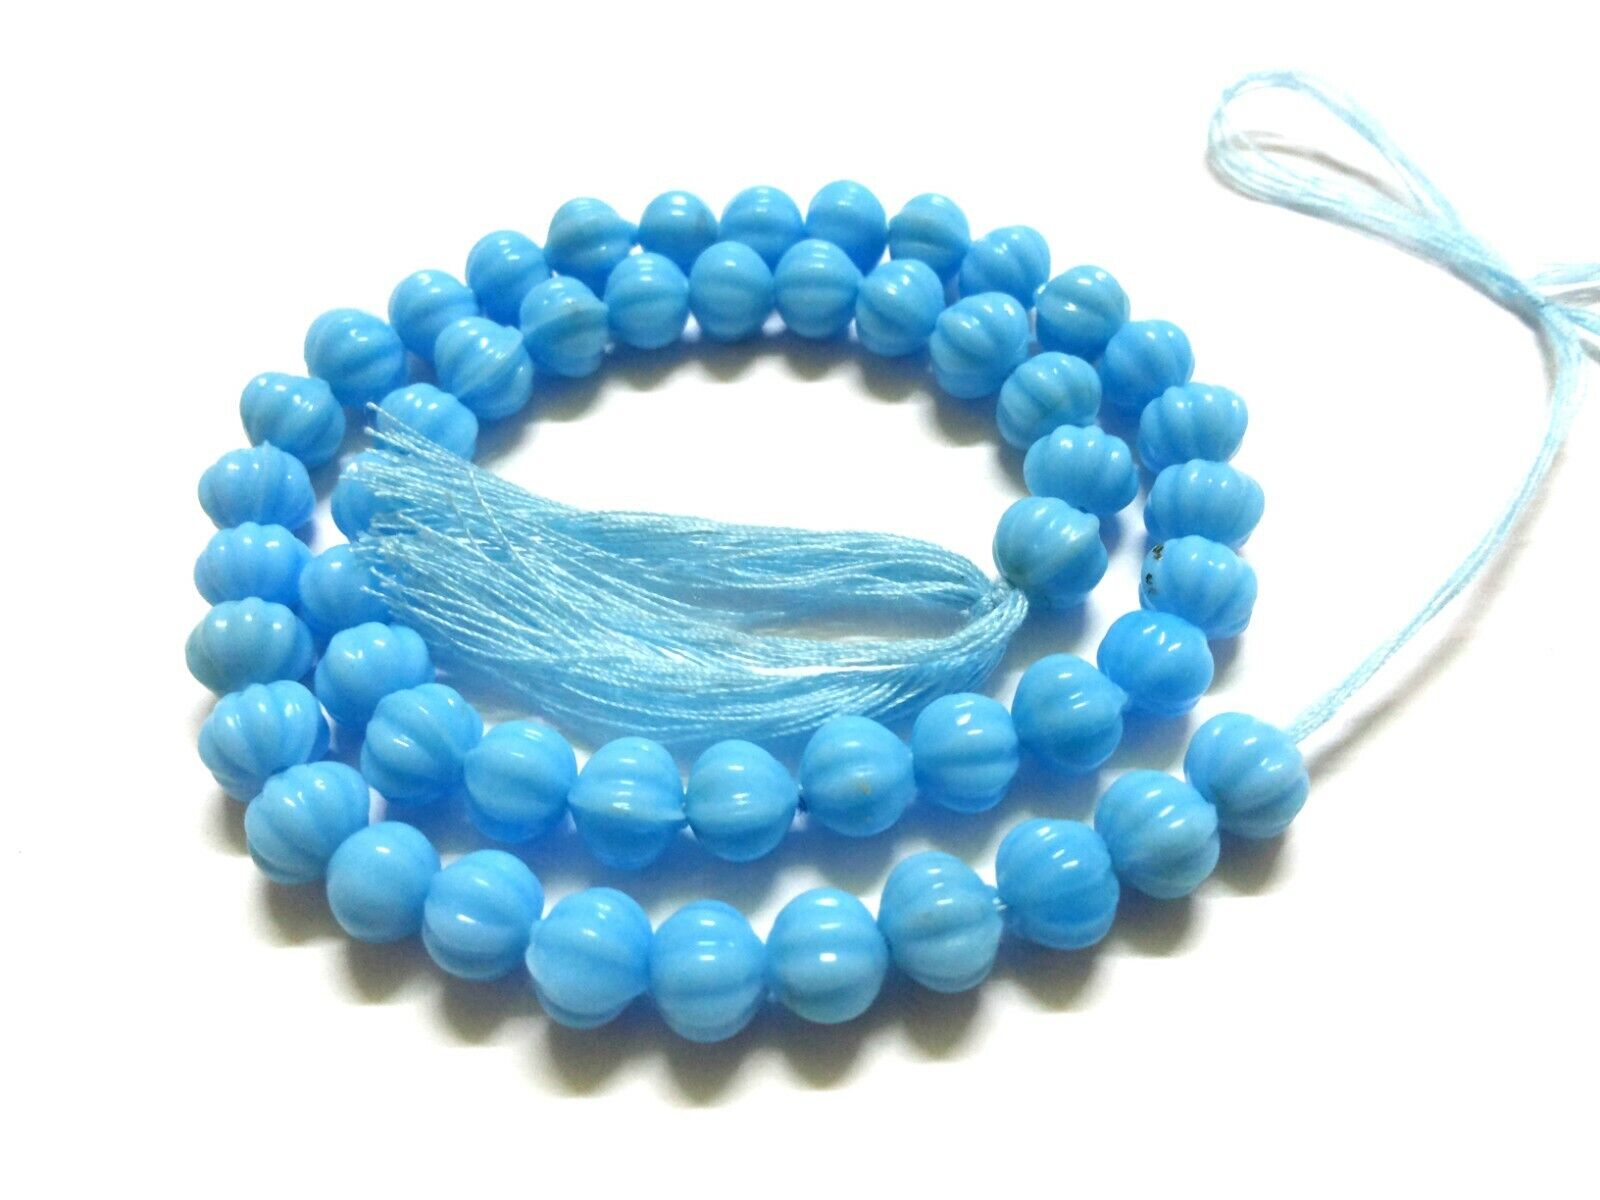 5 Strand Turquoise Quartz Watermelon Pumpkin Carved 6-7mm Loose Beads 10